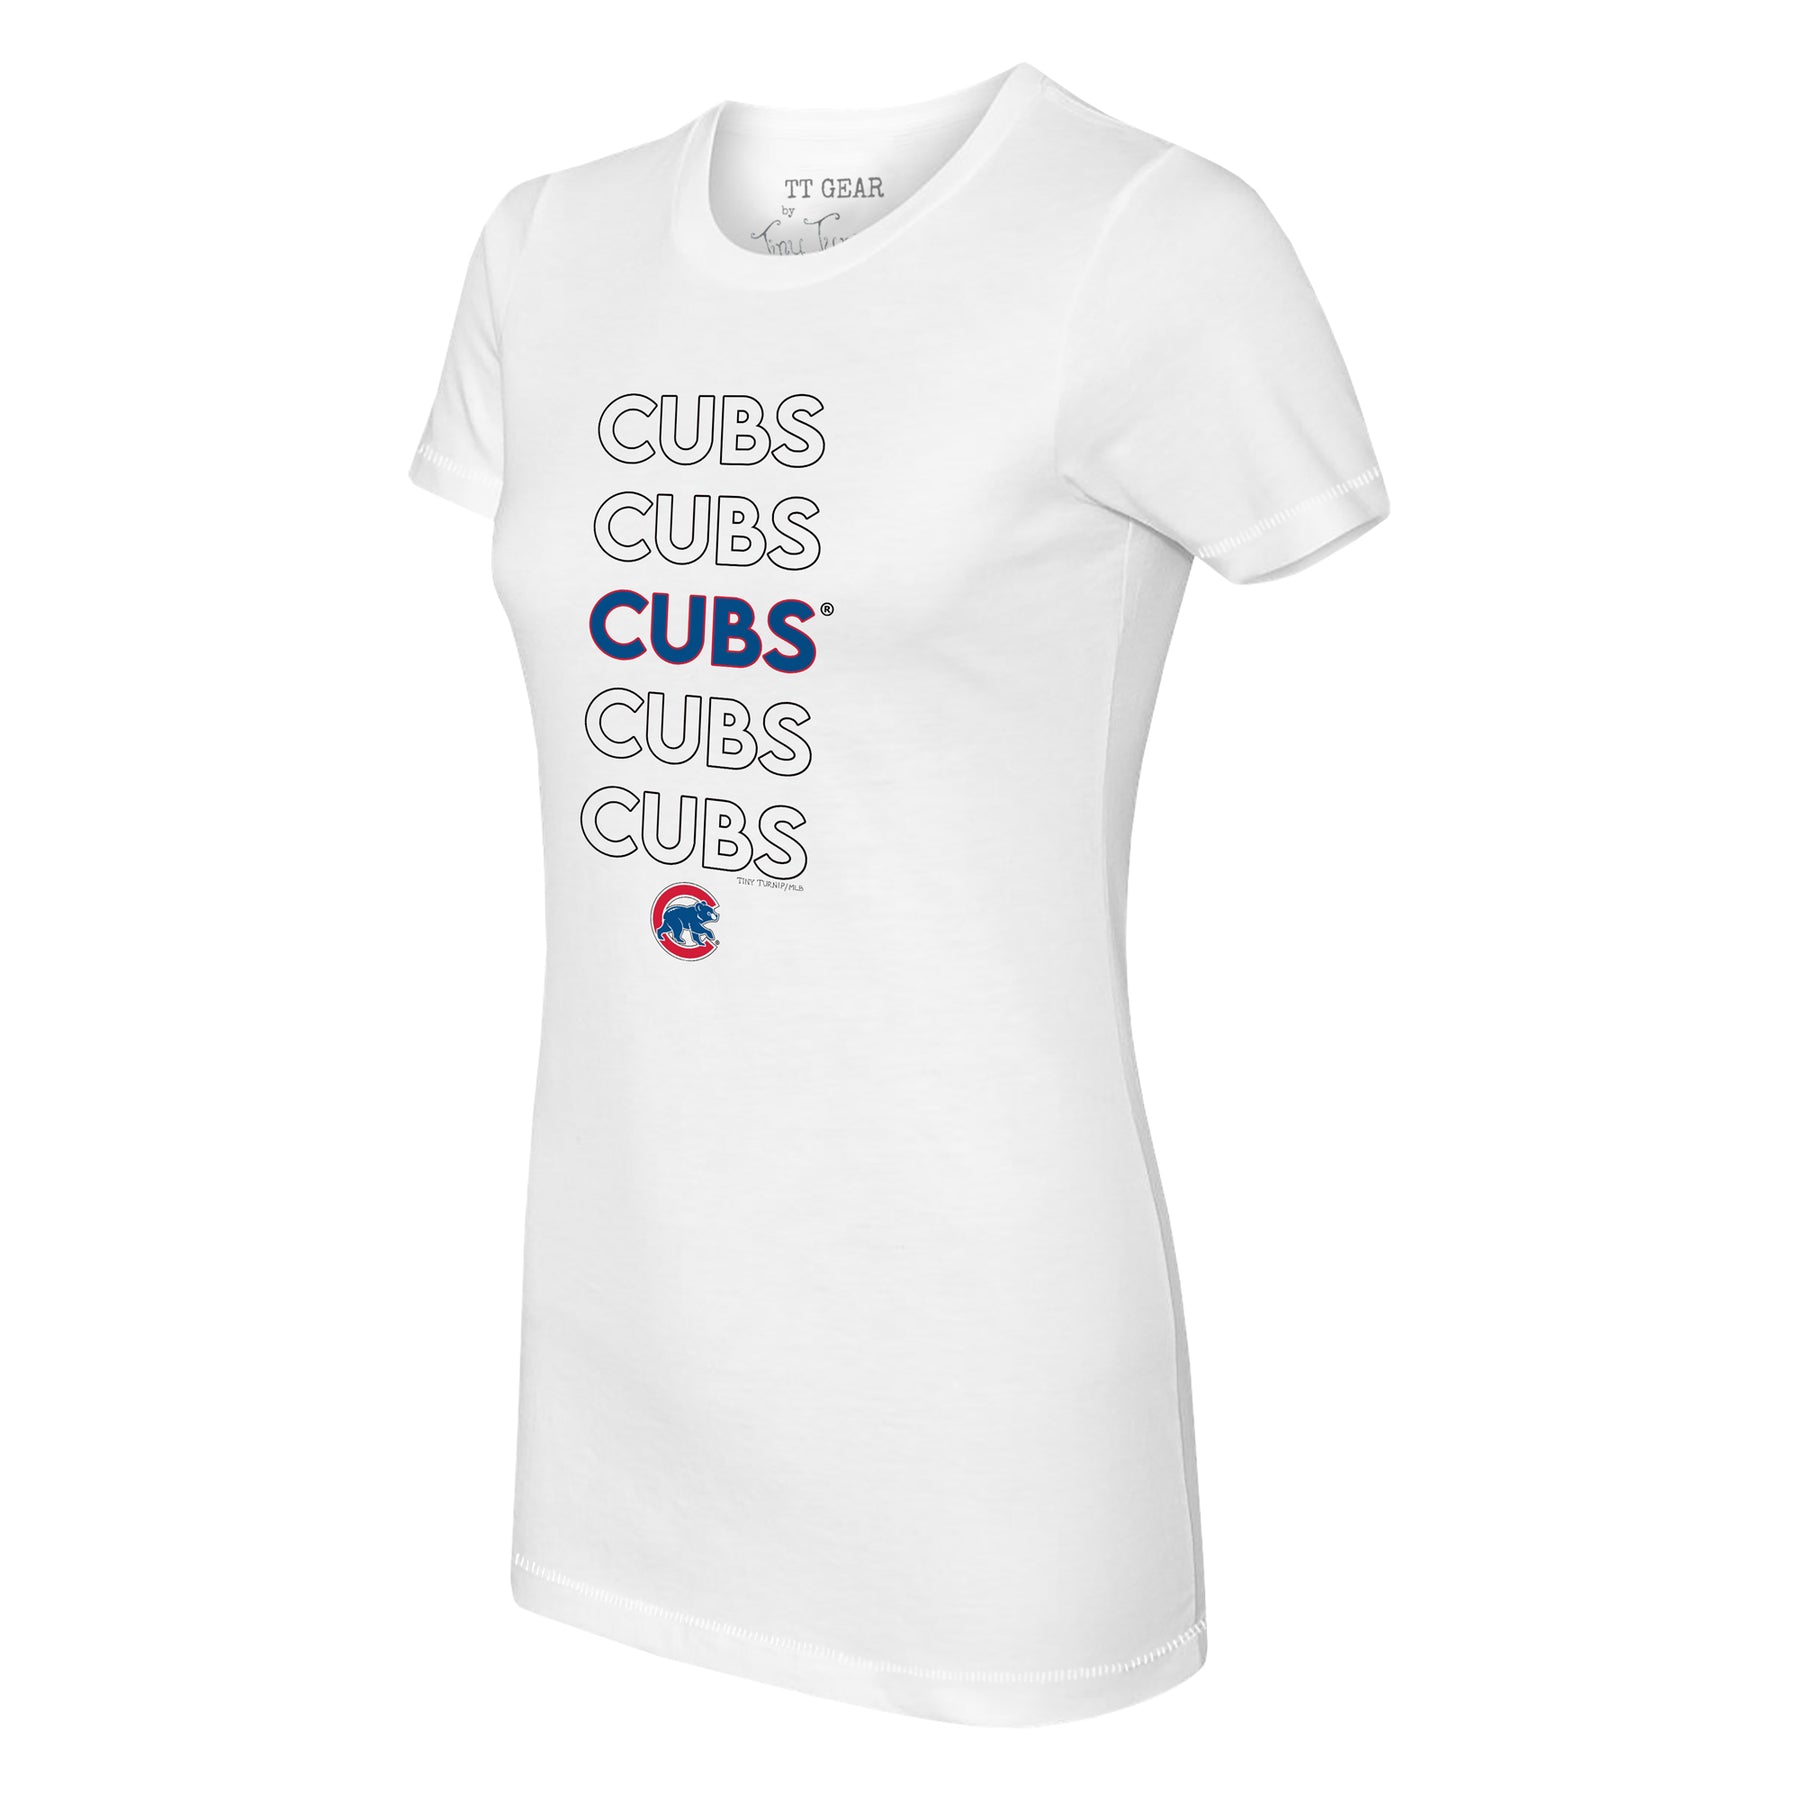 Lids Chicago Cubs Tiny Turnip Youth Stacked Raglan 3/4 Sleeve T-Shirt -  White/Black